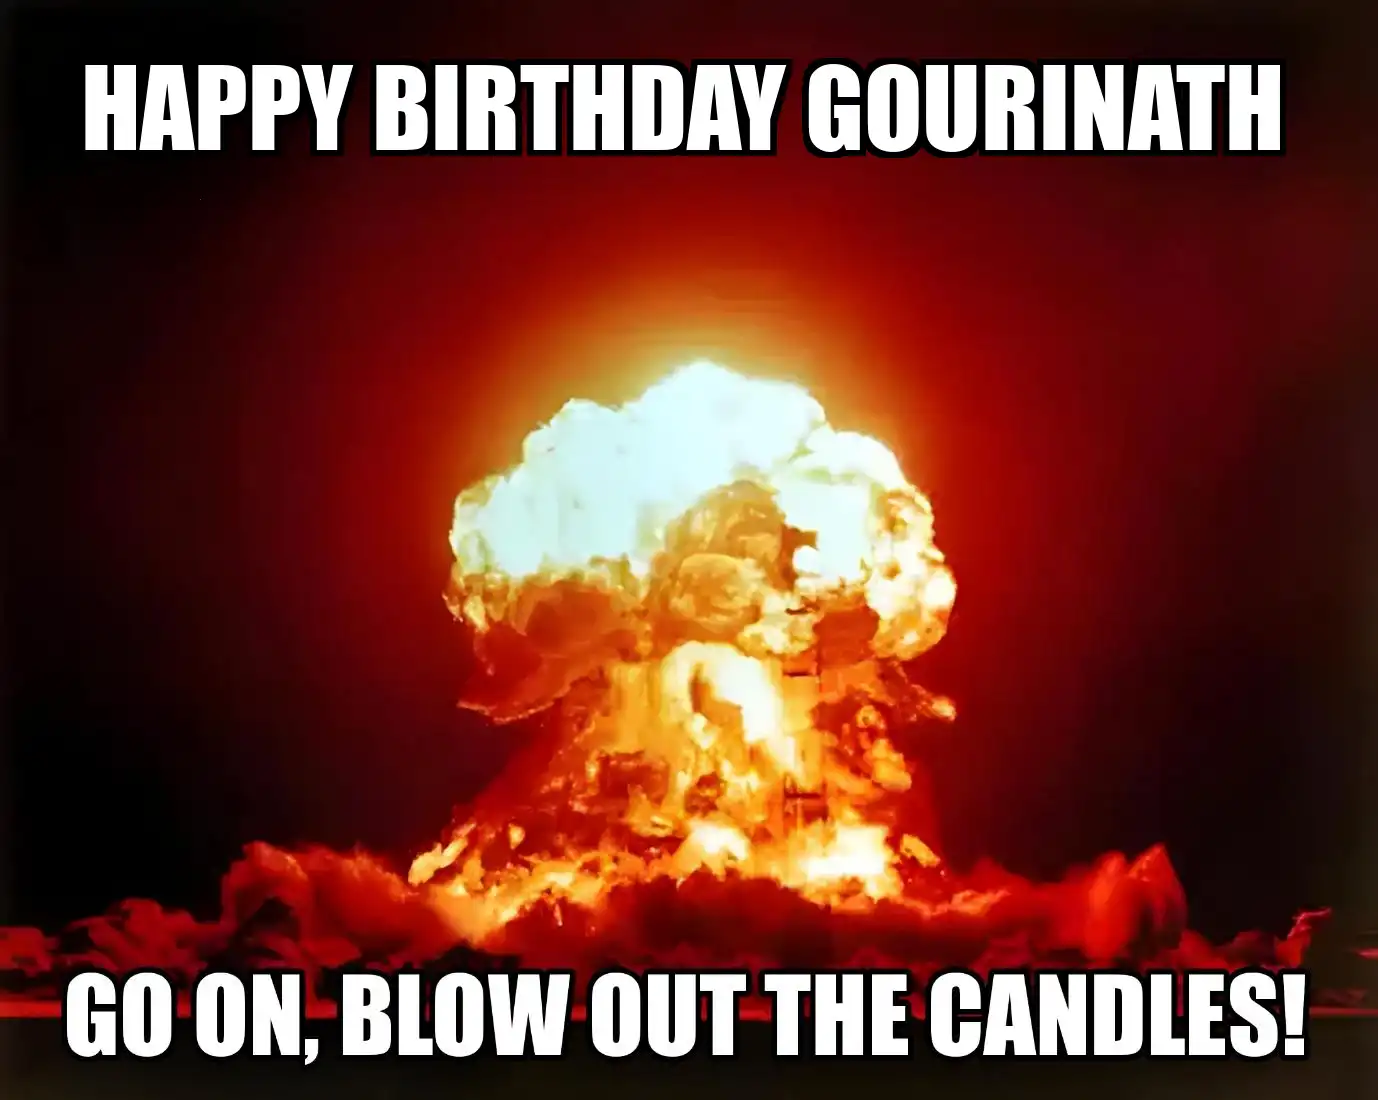 Happy Birthday Gourinath Go On Blow Out The Candles Meme